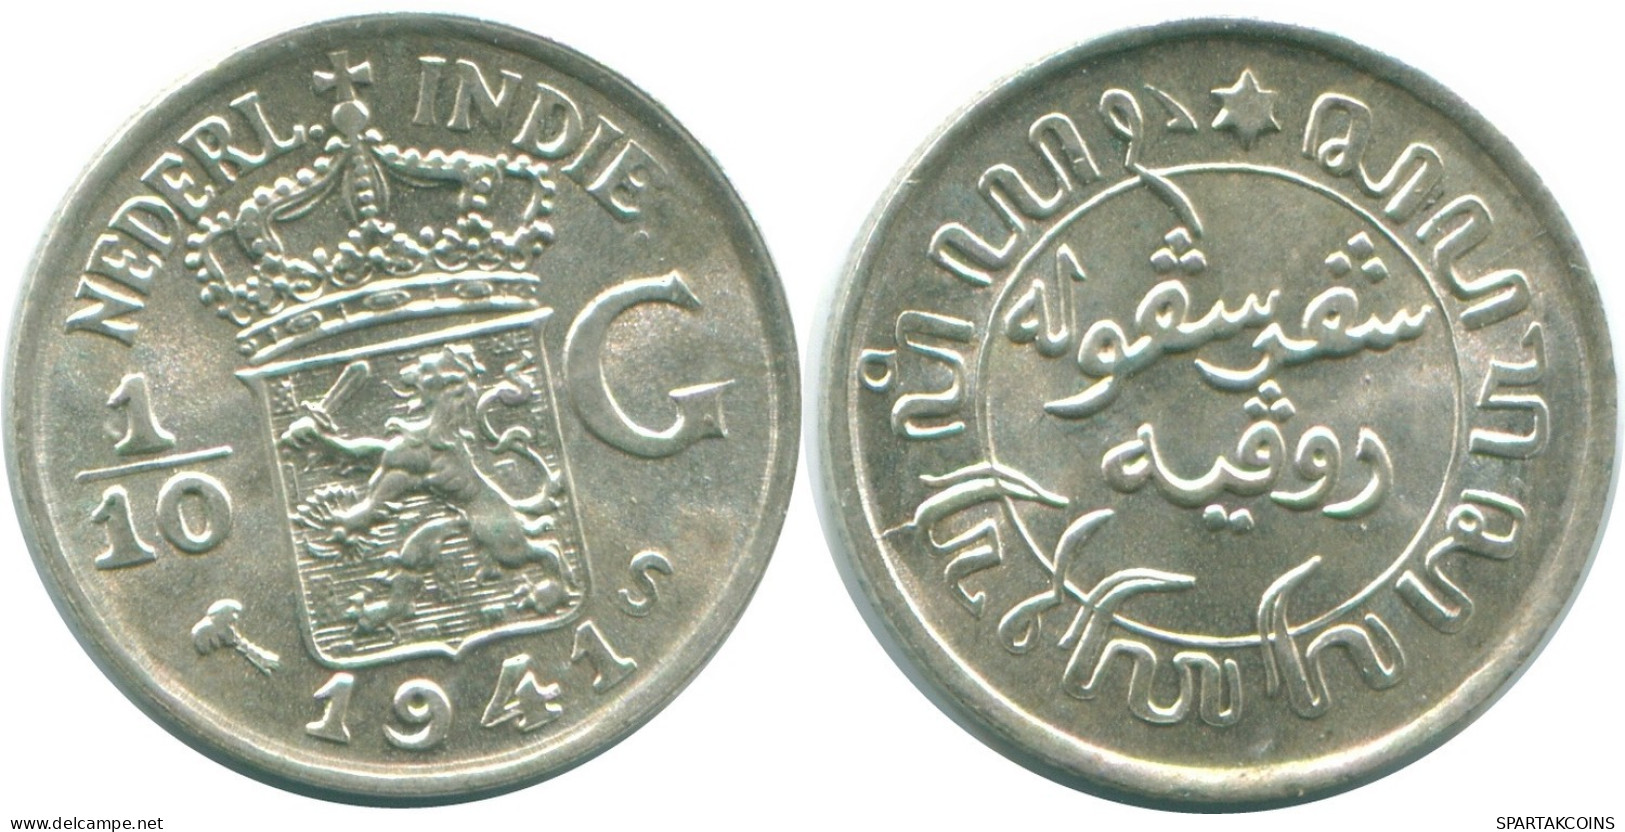 1/10 GULDEN 1941 S NETHERLANDS EAST INDIES SILVER Colonial Coin #NL13707.3.U.A - Indes Neerlandesas